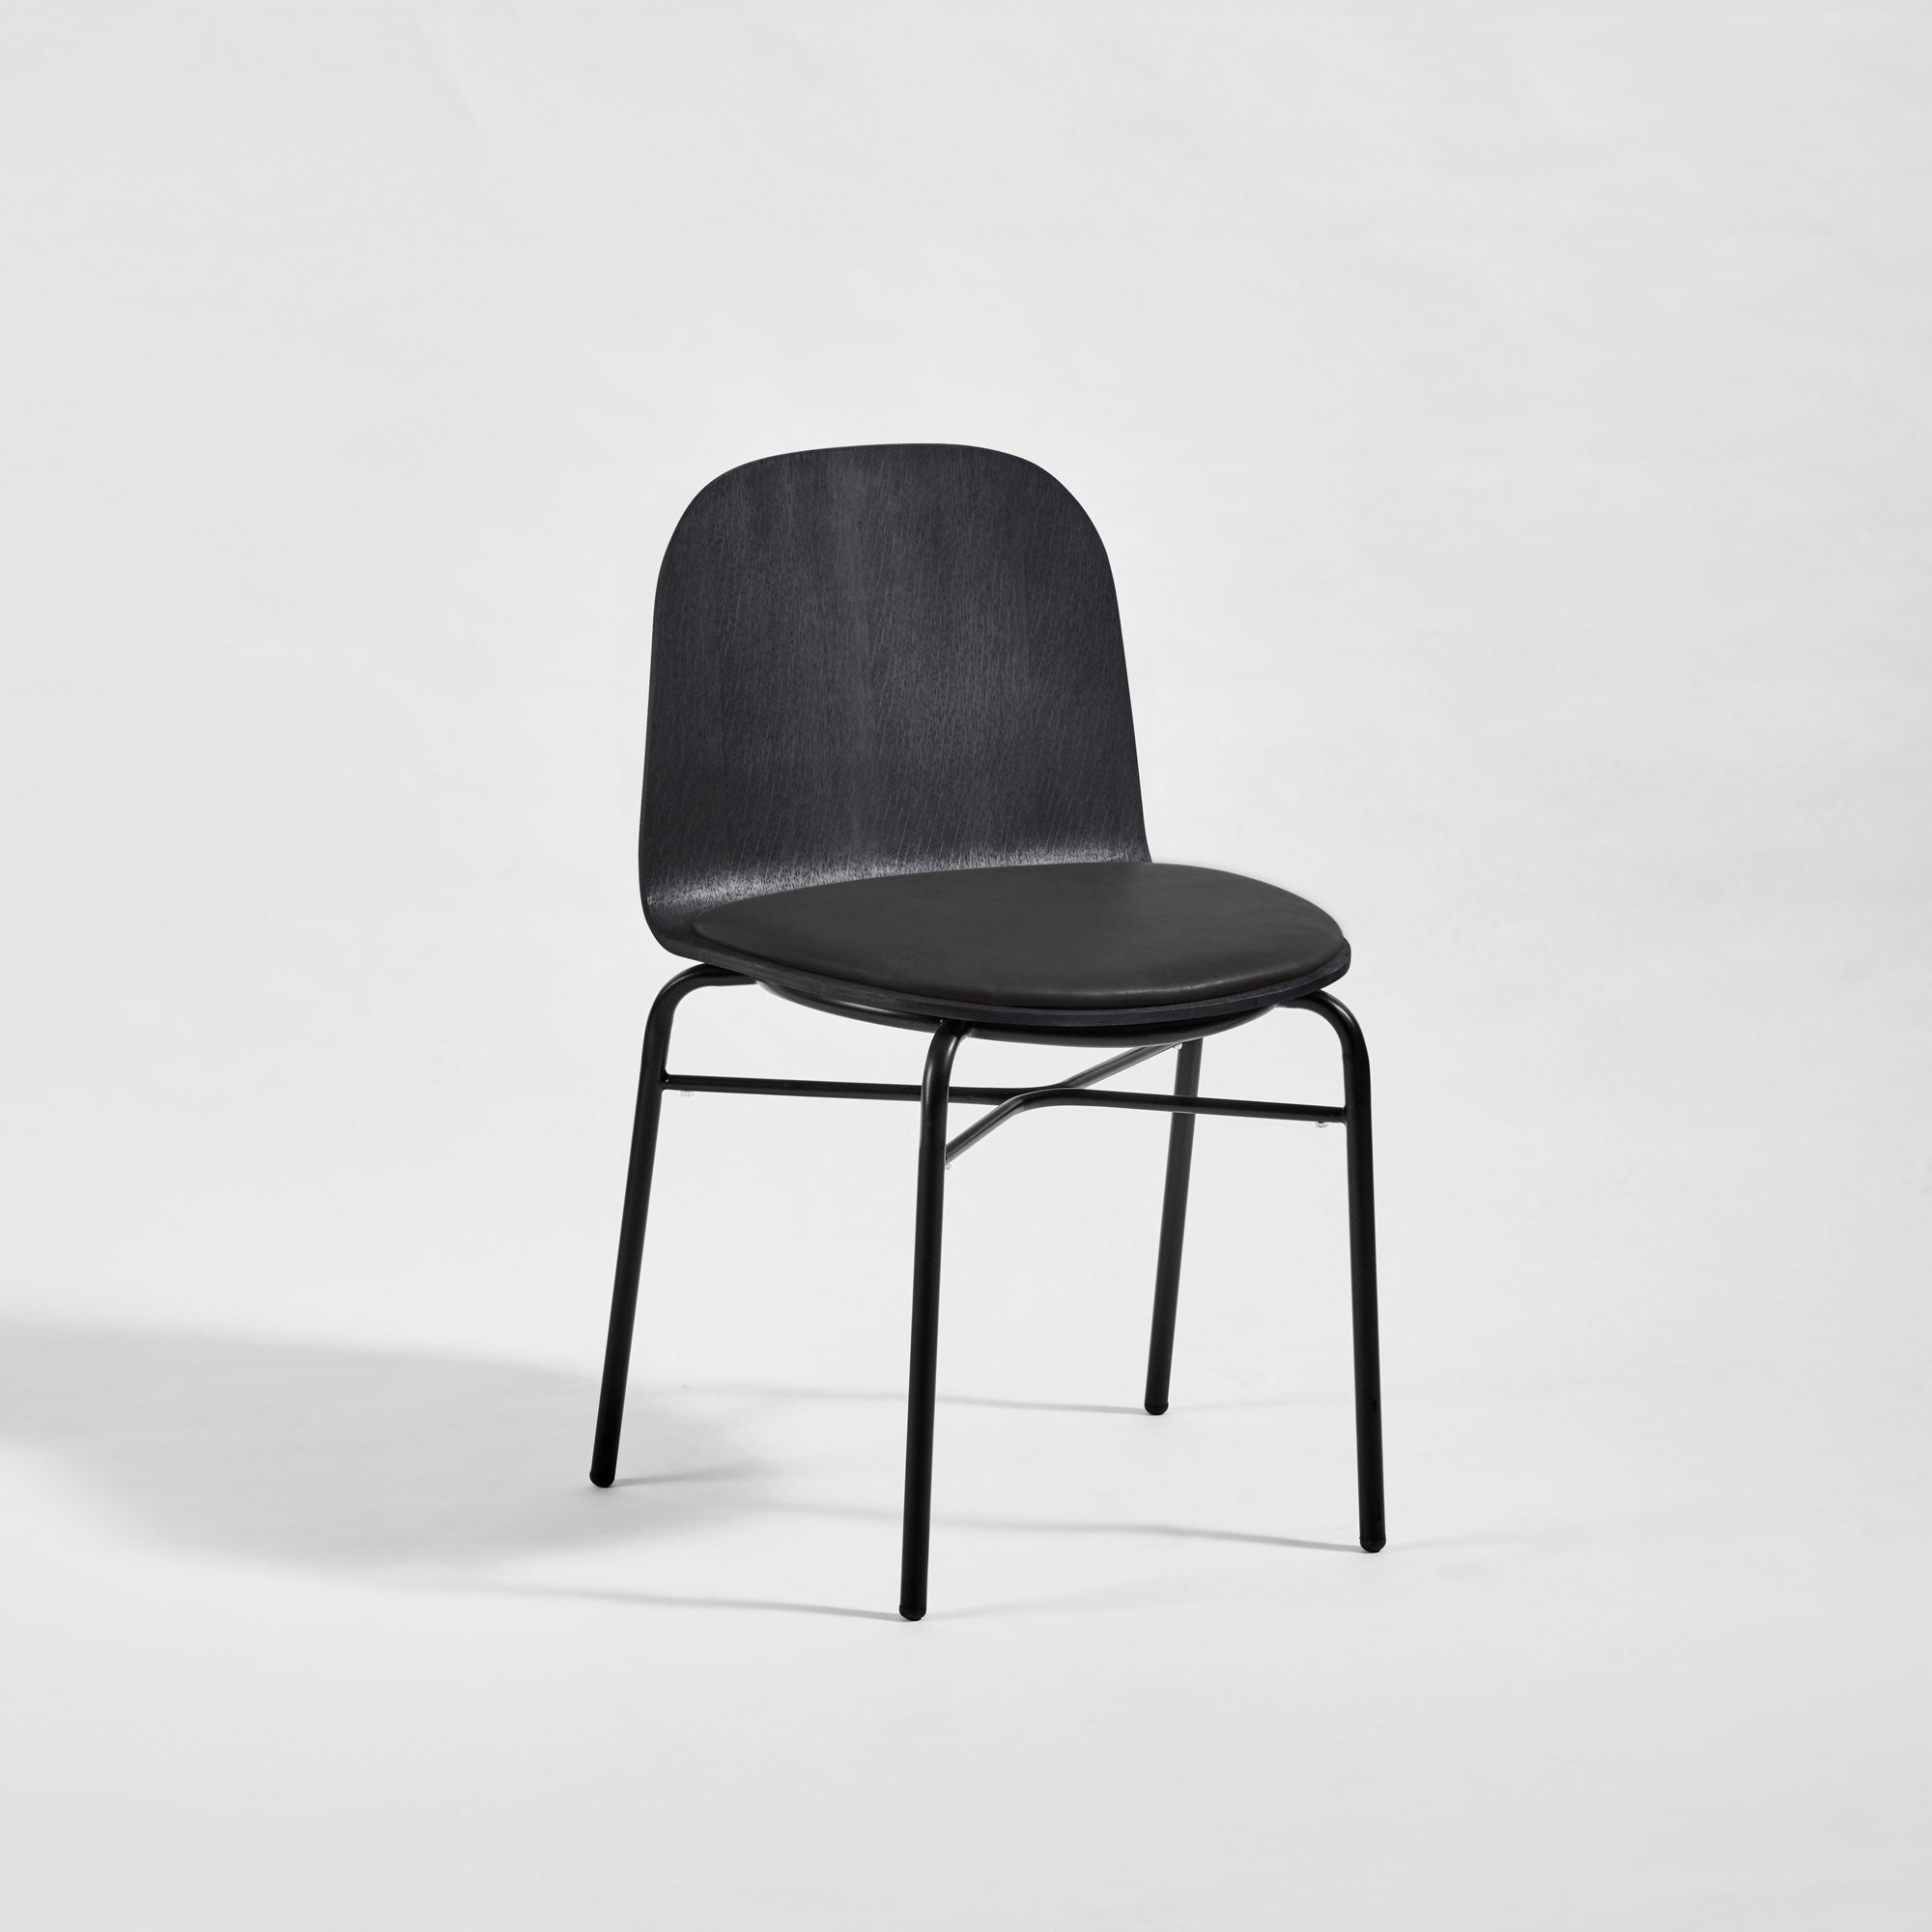 Potato Chair | Stacking Timber & Upholstered Dining Office Chair with Handle | GibsonKarlo | DesignByThem ** HF2 Lariat (Vinyl) - 006 Black